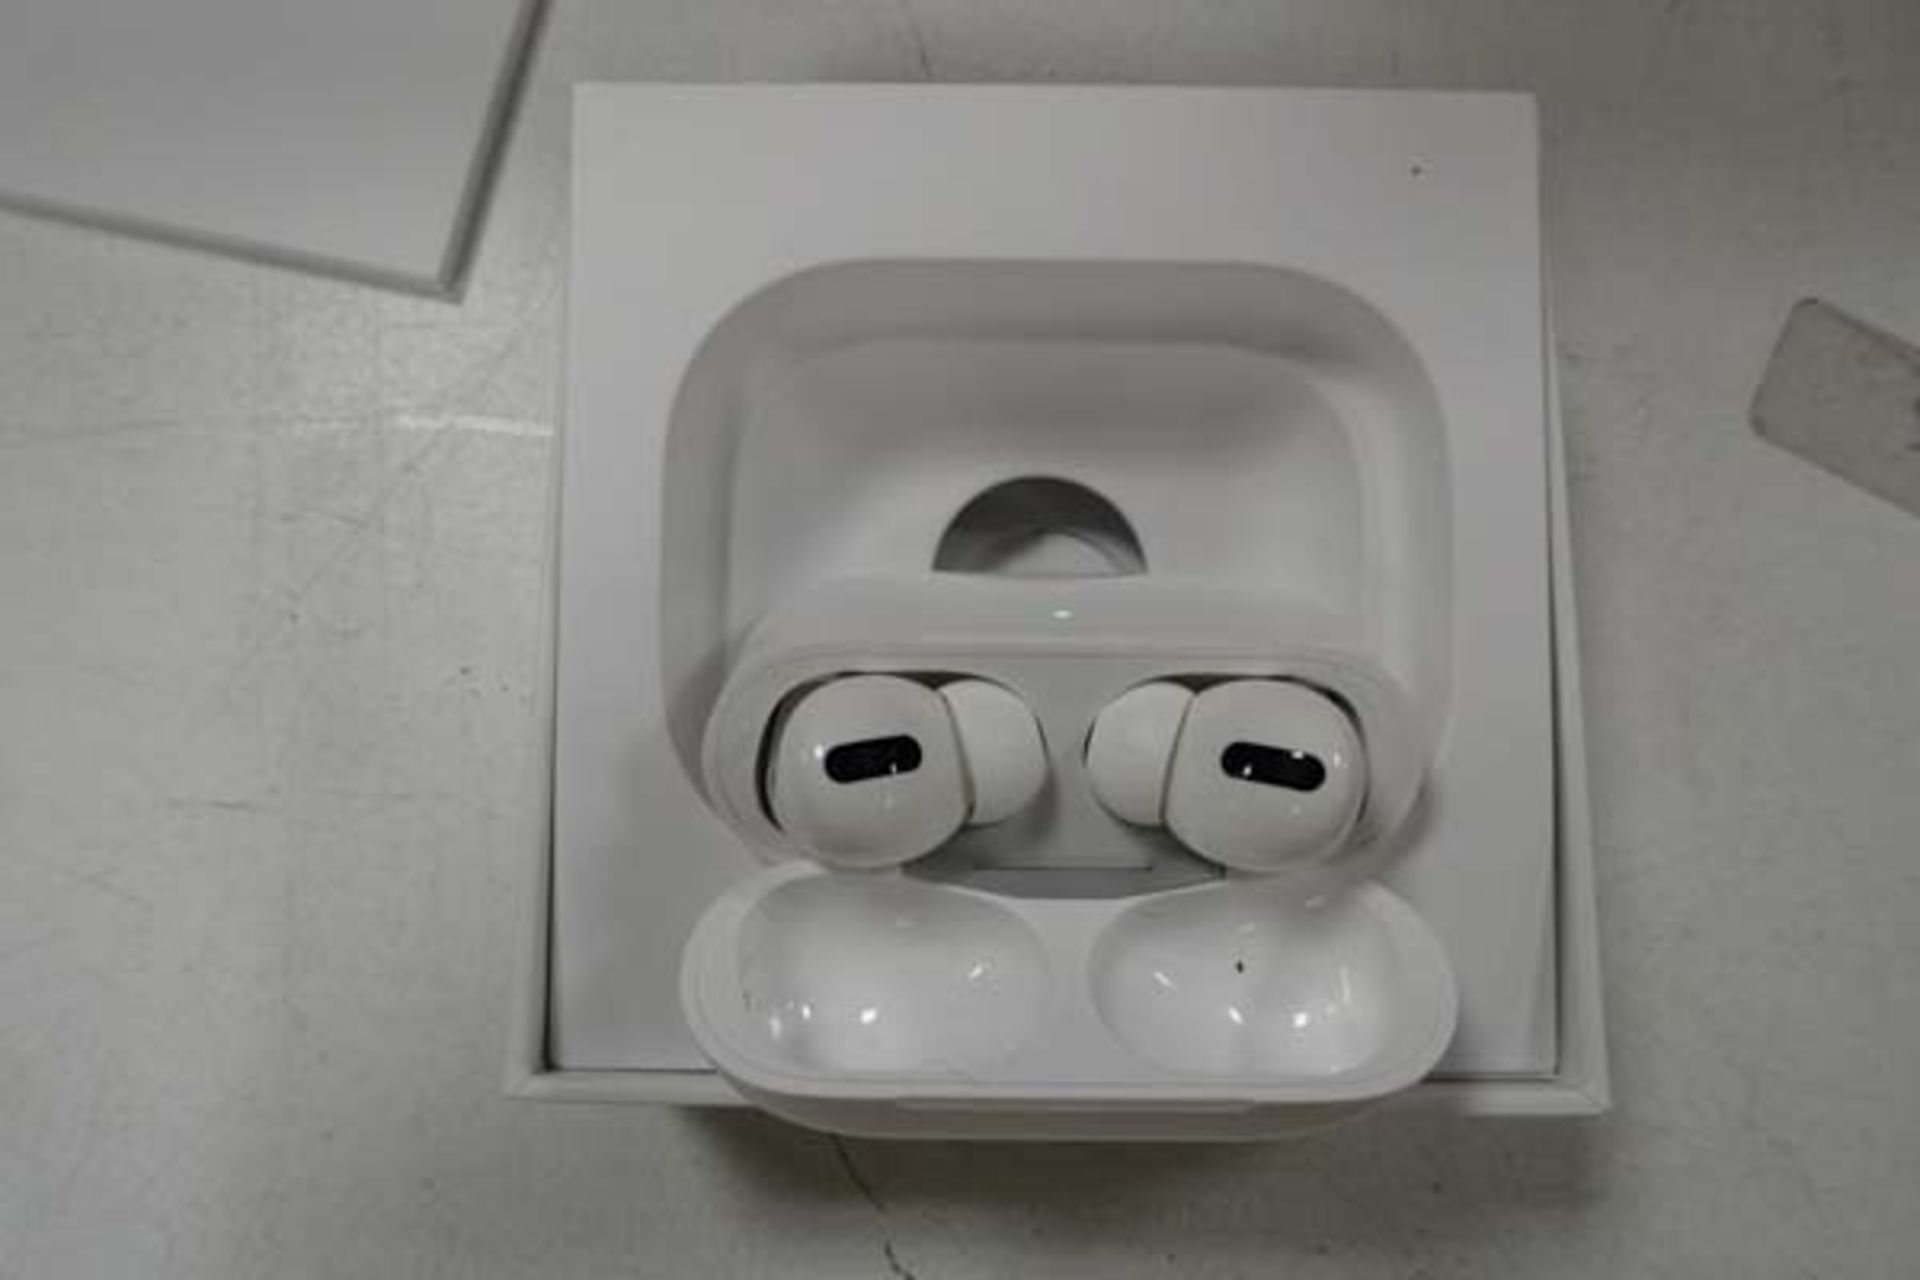 2020 Pair of purple Air pods pro with wireless charging case in box